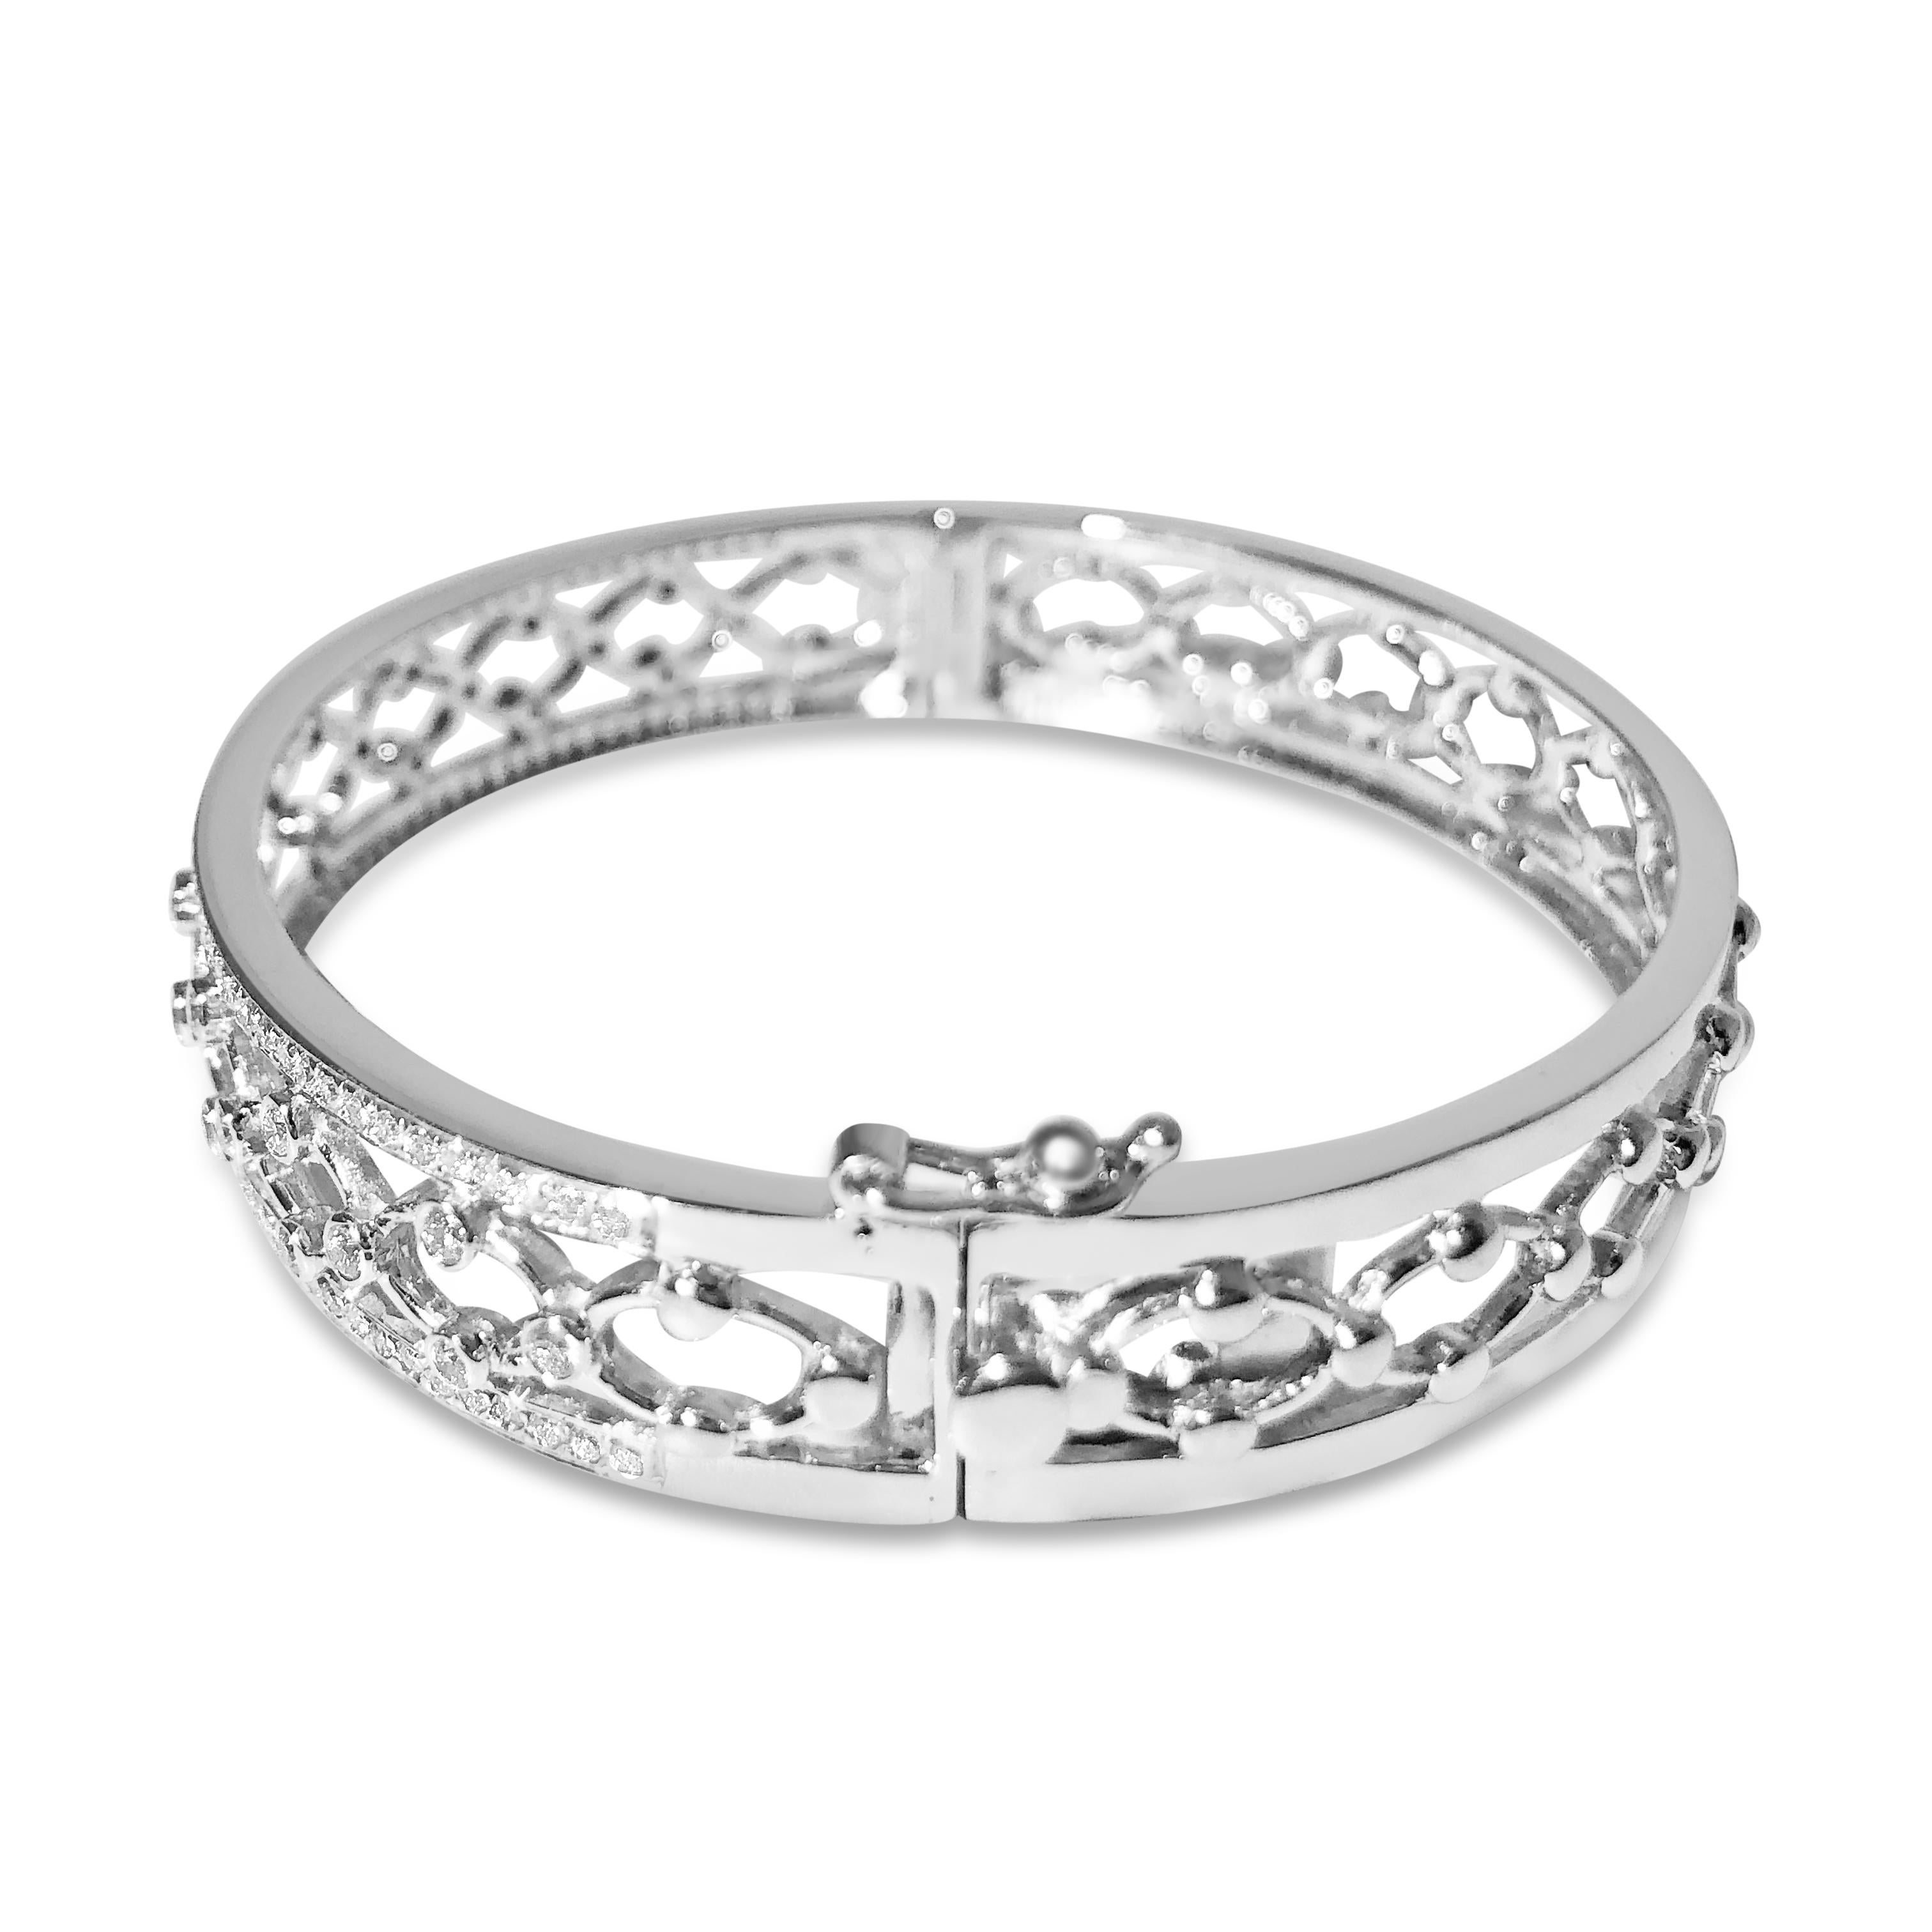 Our “Venice” bracelet is an intricate feat of filigree work set in 14K white gold. 134 round 1.2mm and 1.7mm white diamonds totaling 1.50ct adorn the upward-facing half. The oval-shaped bangle securely closes with a snap & hinge.

Specifications:
-